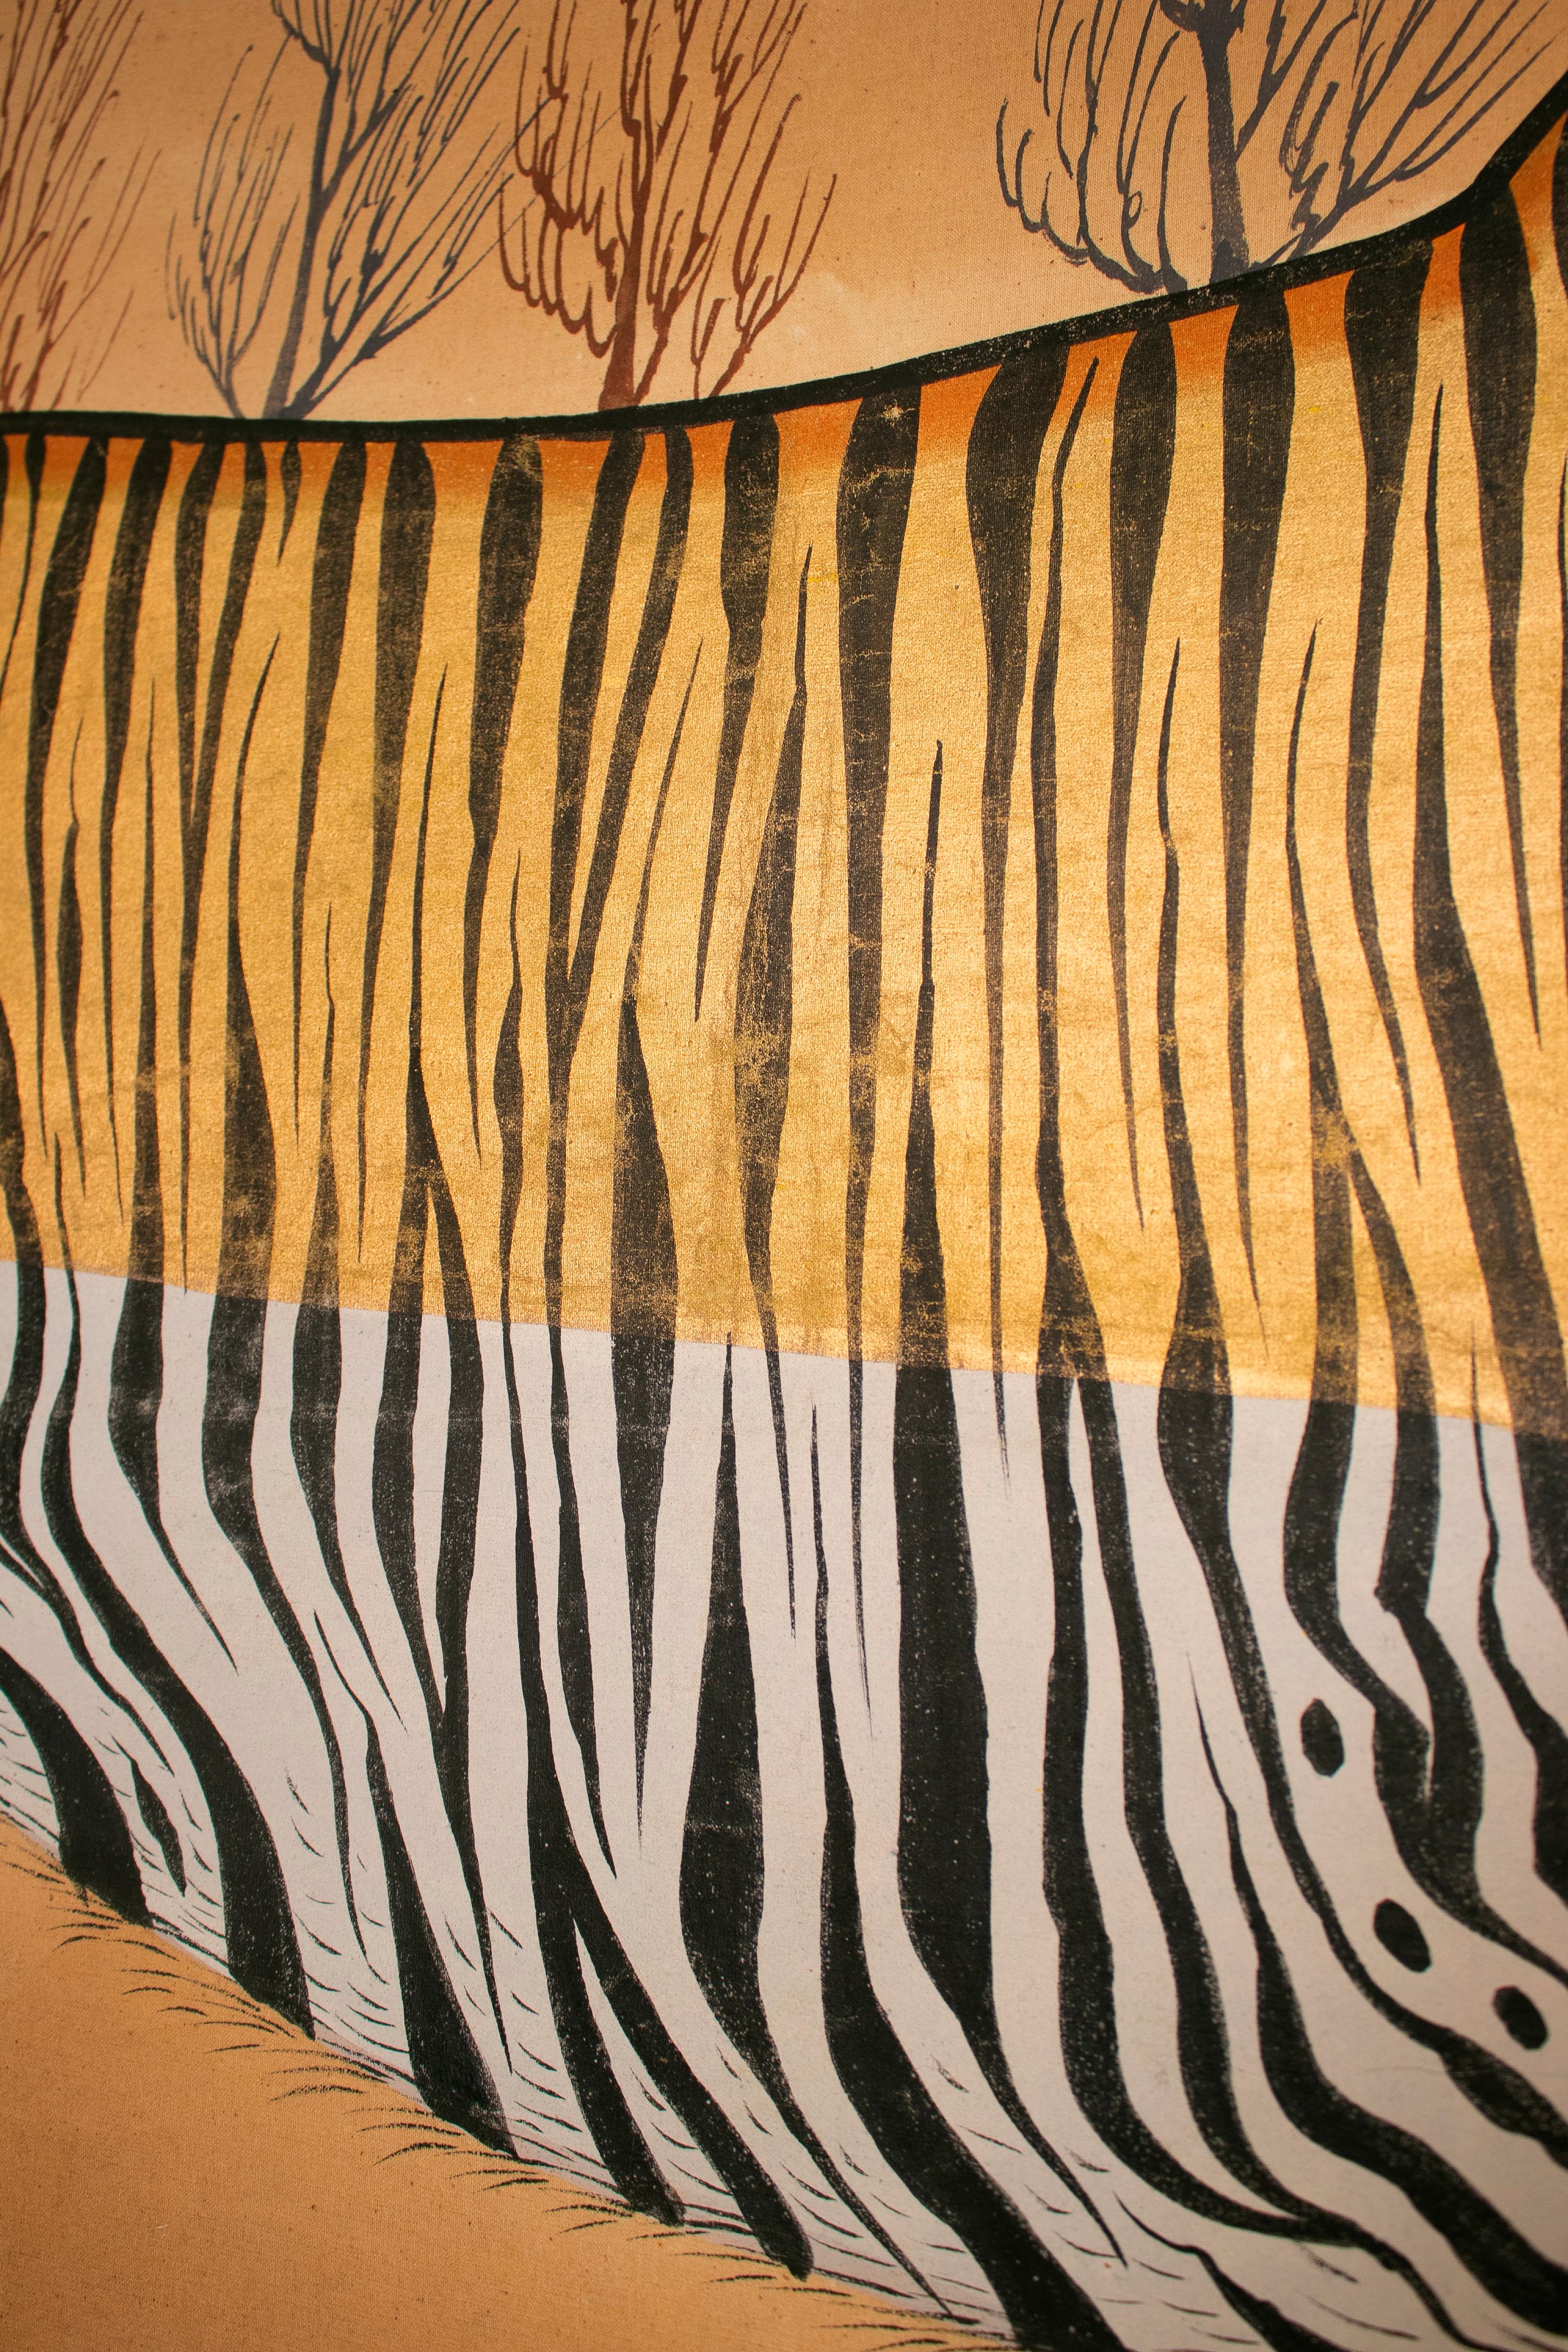 Jaime Parlade Designed Tiger Drawn on Fabric and Framed in Bamboo & Indian Straw 2